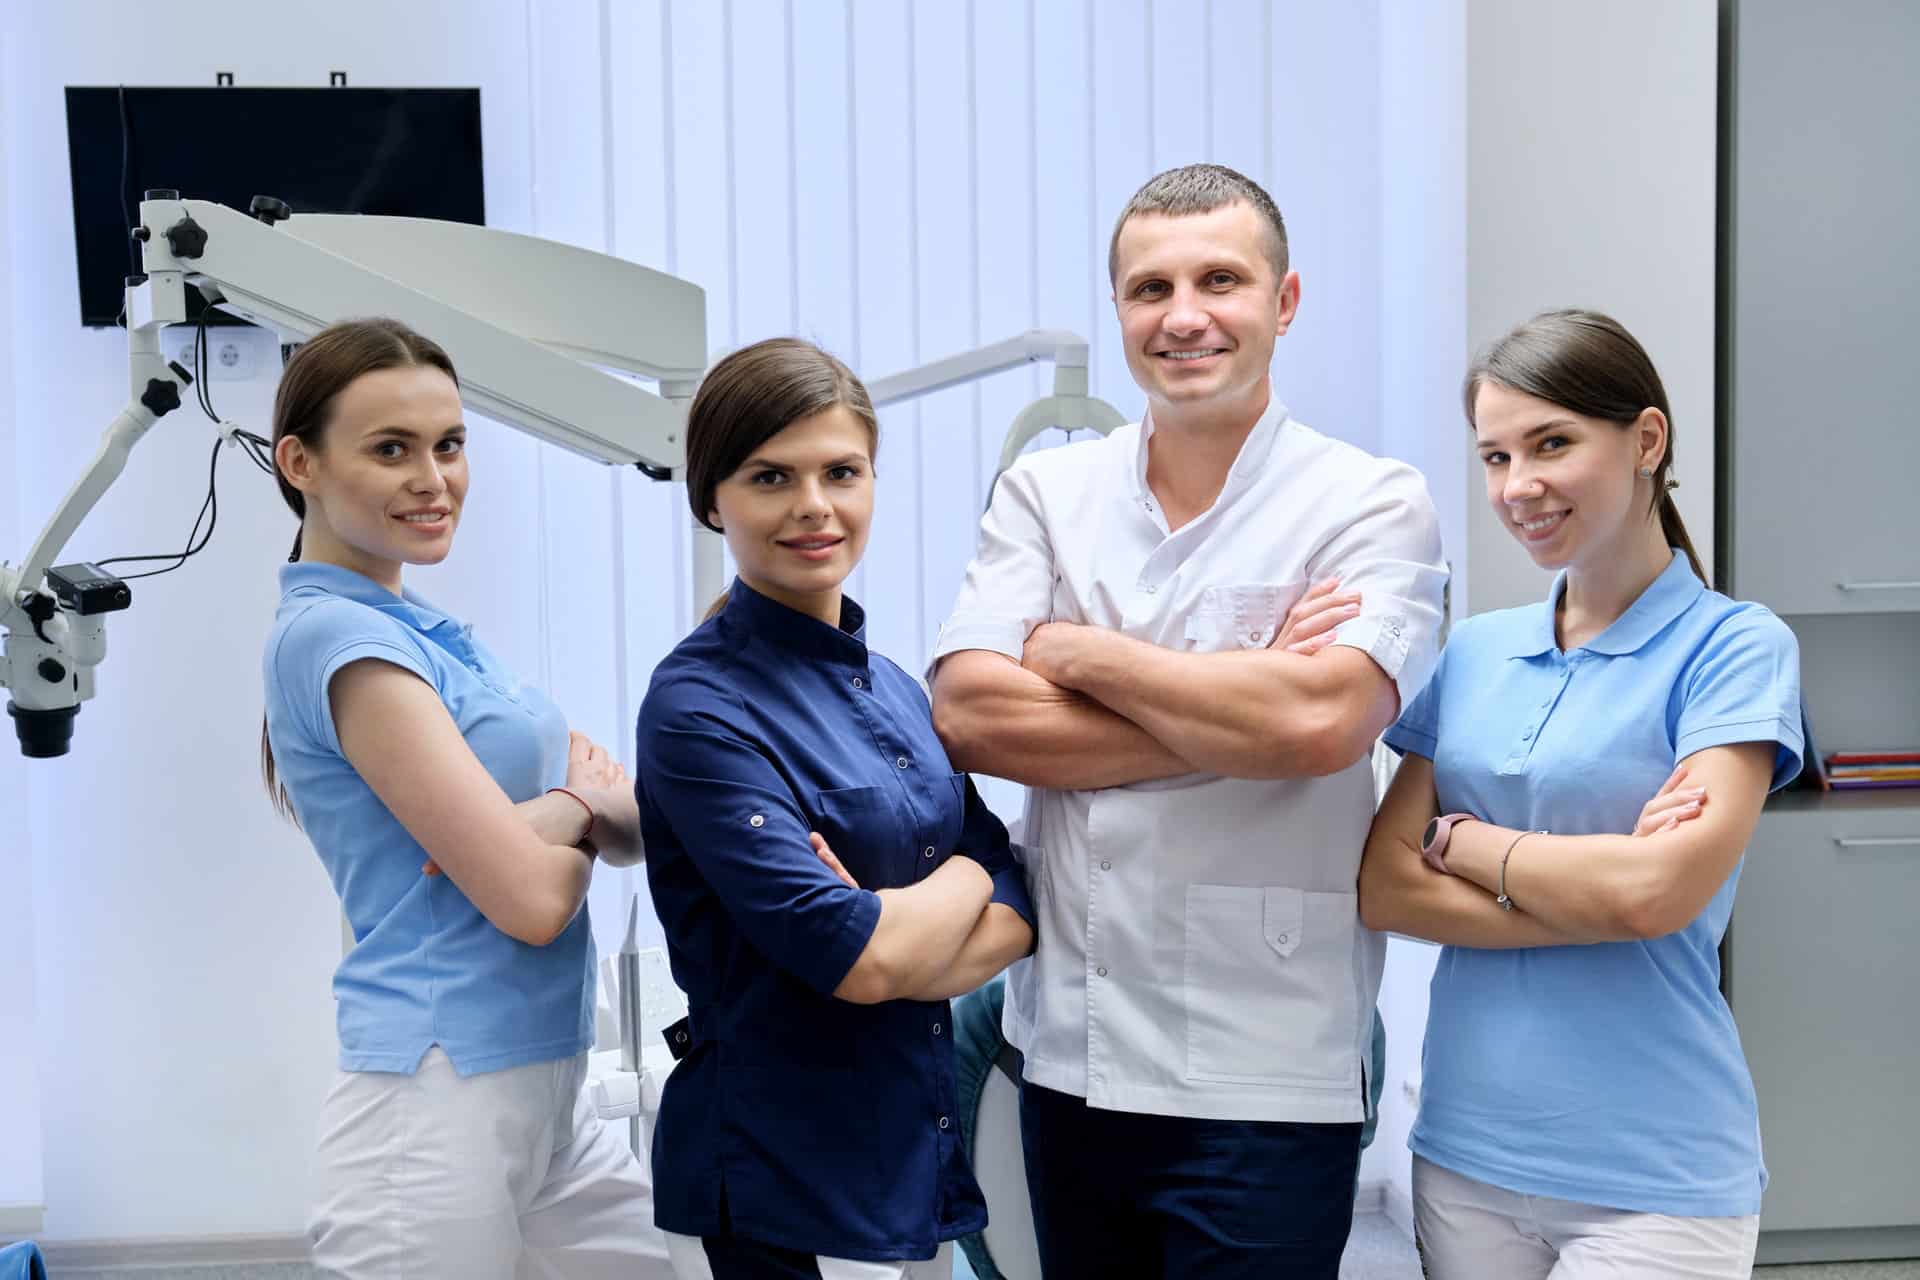 iTeam, people management software for Dental practices